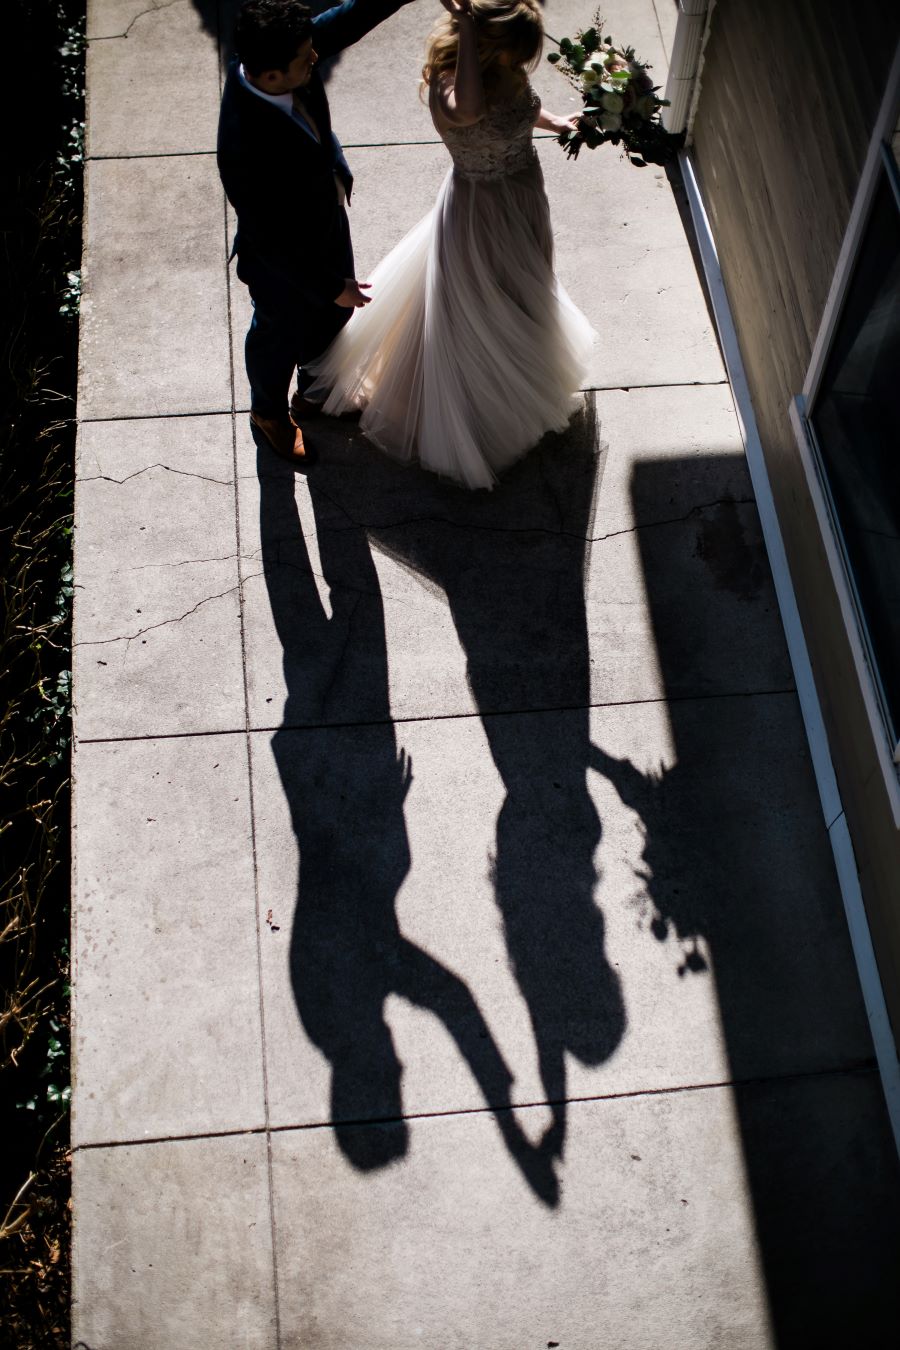 Shadow of groom twirling the bride on the sidewalk / Elopement / Spring / March / Dusty Rose